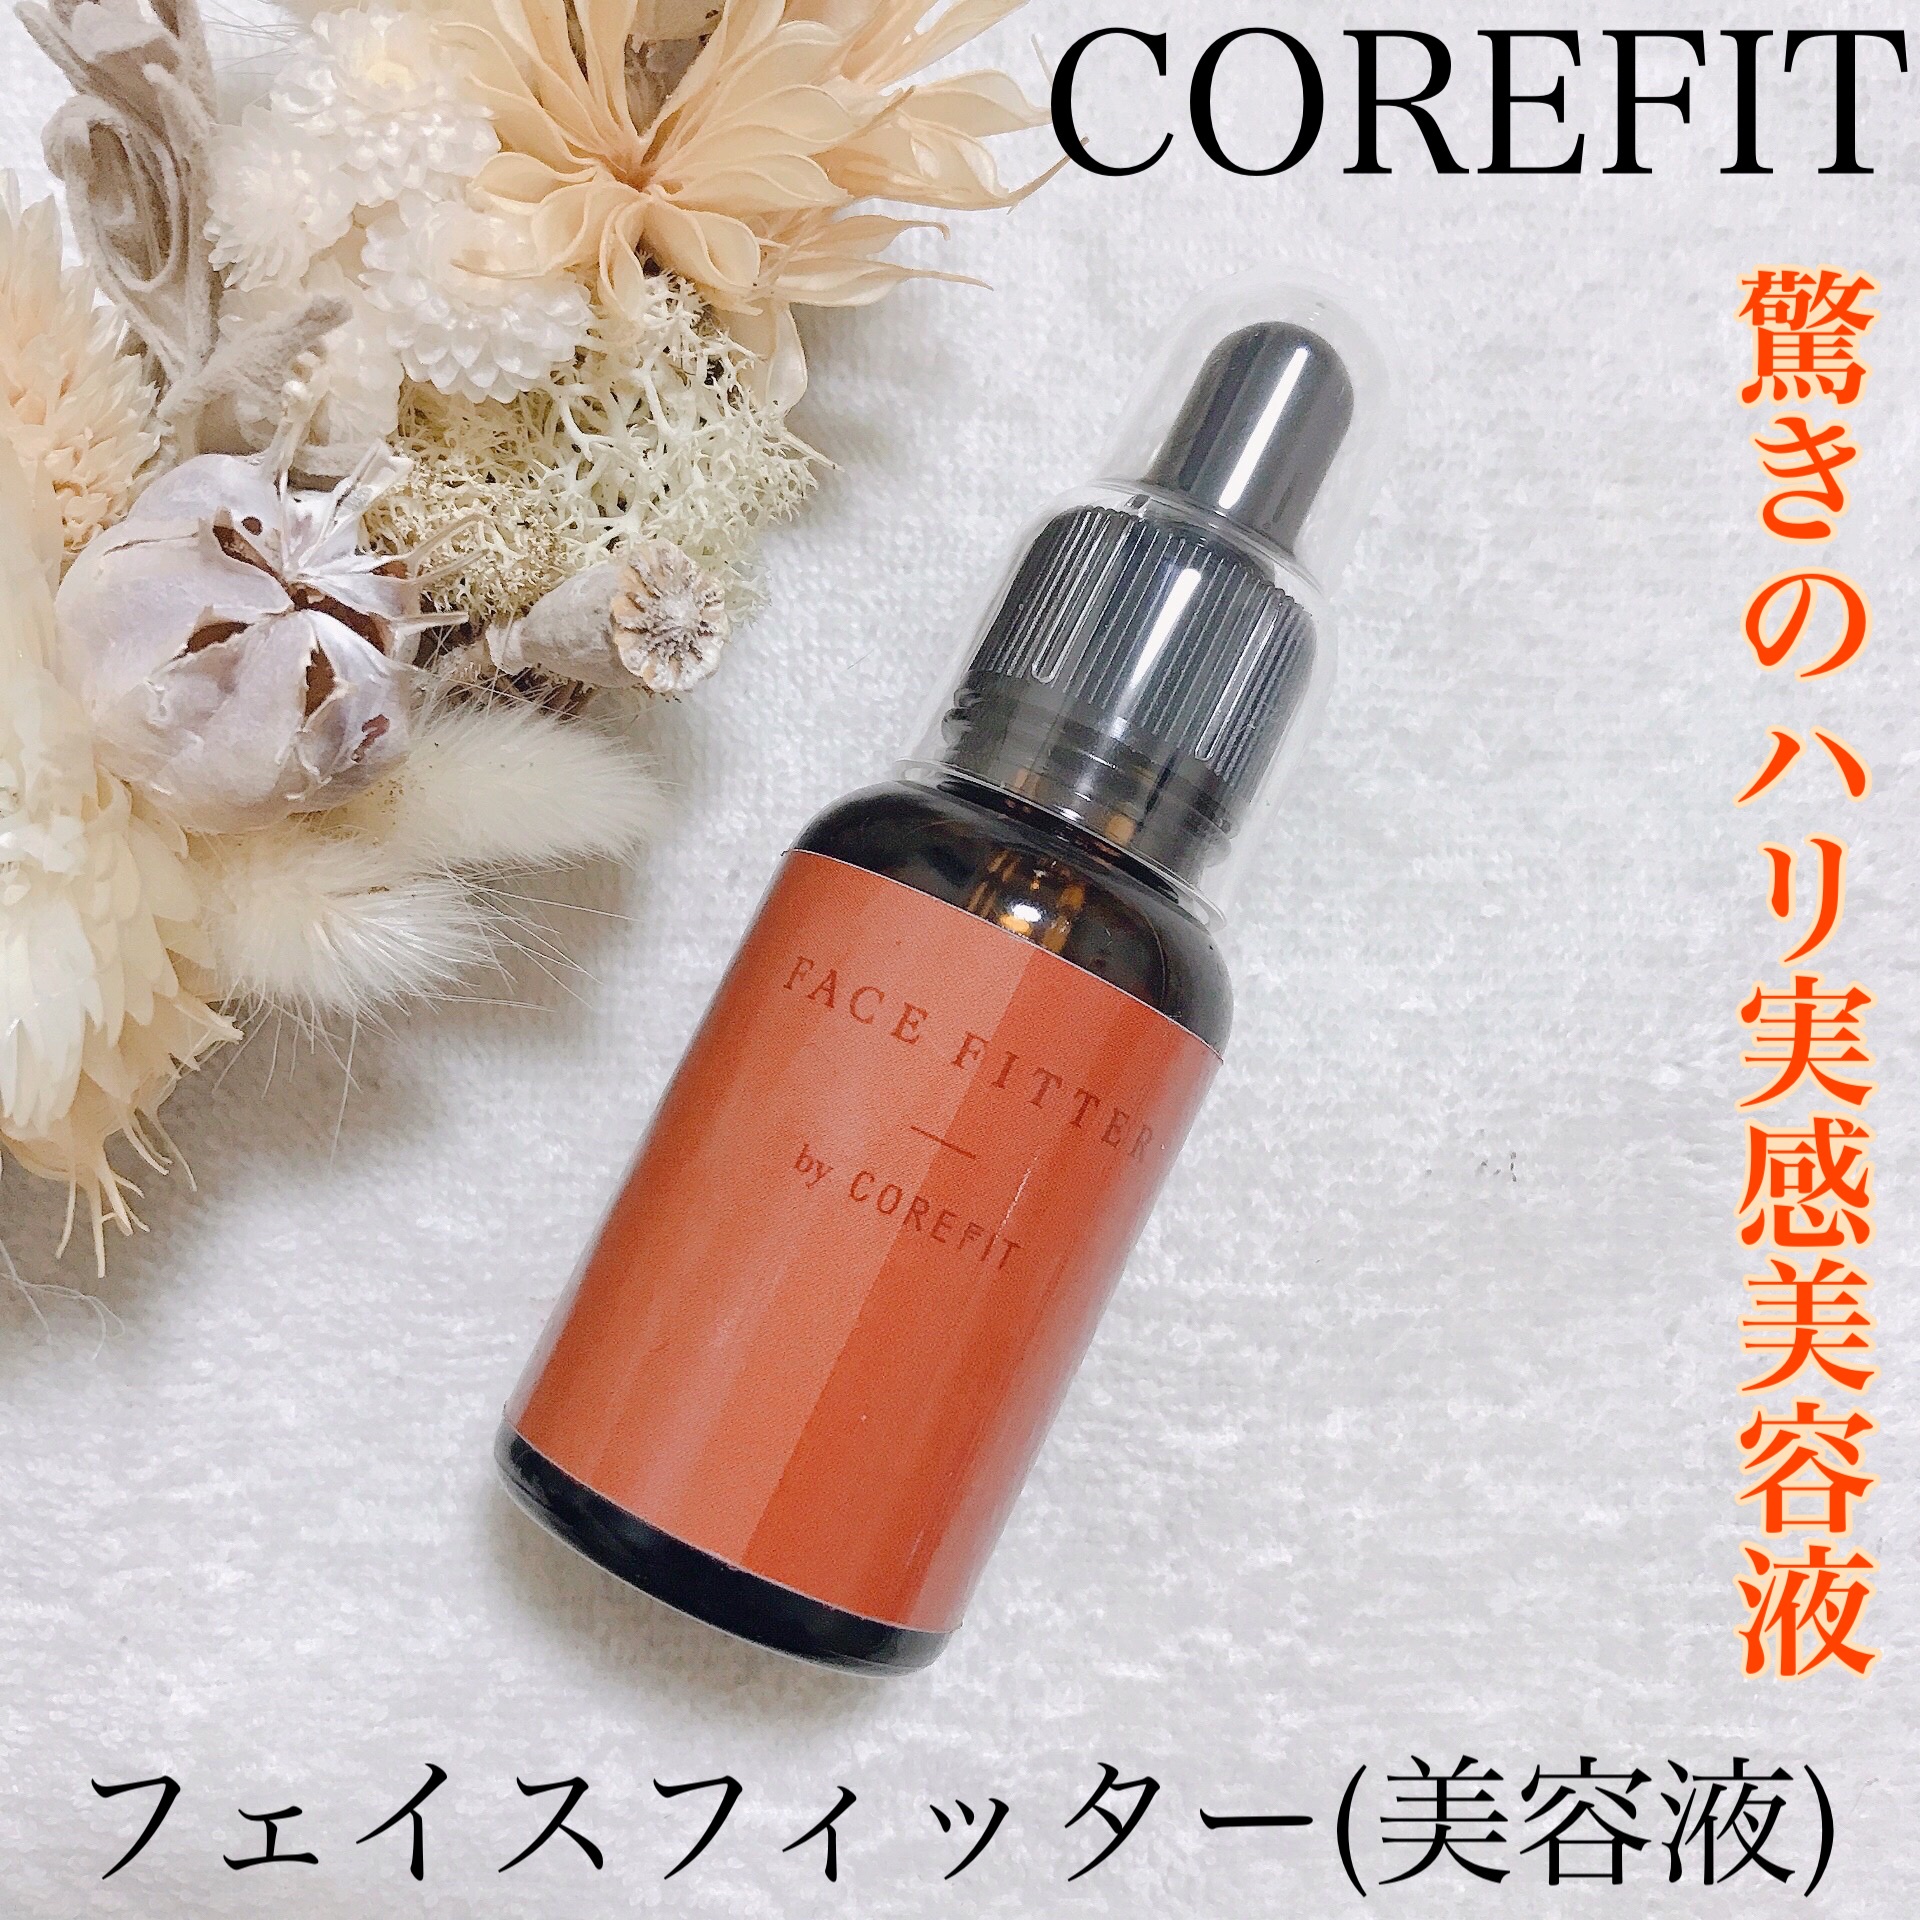 CORE FIT / Face-Fitterの公式商品情報｜美容・化粧品情報はアットコスメ